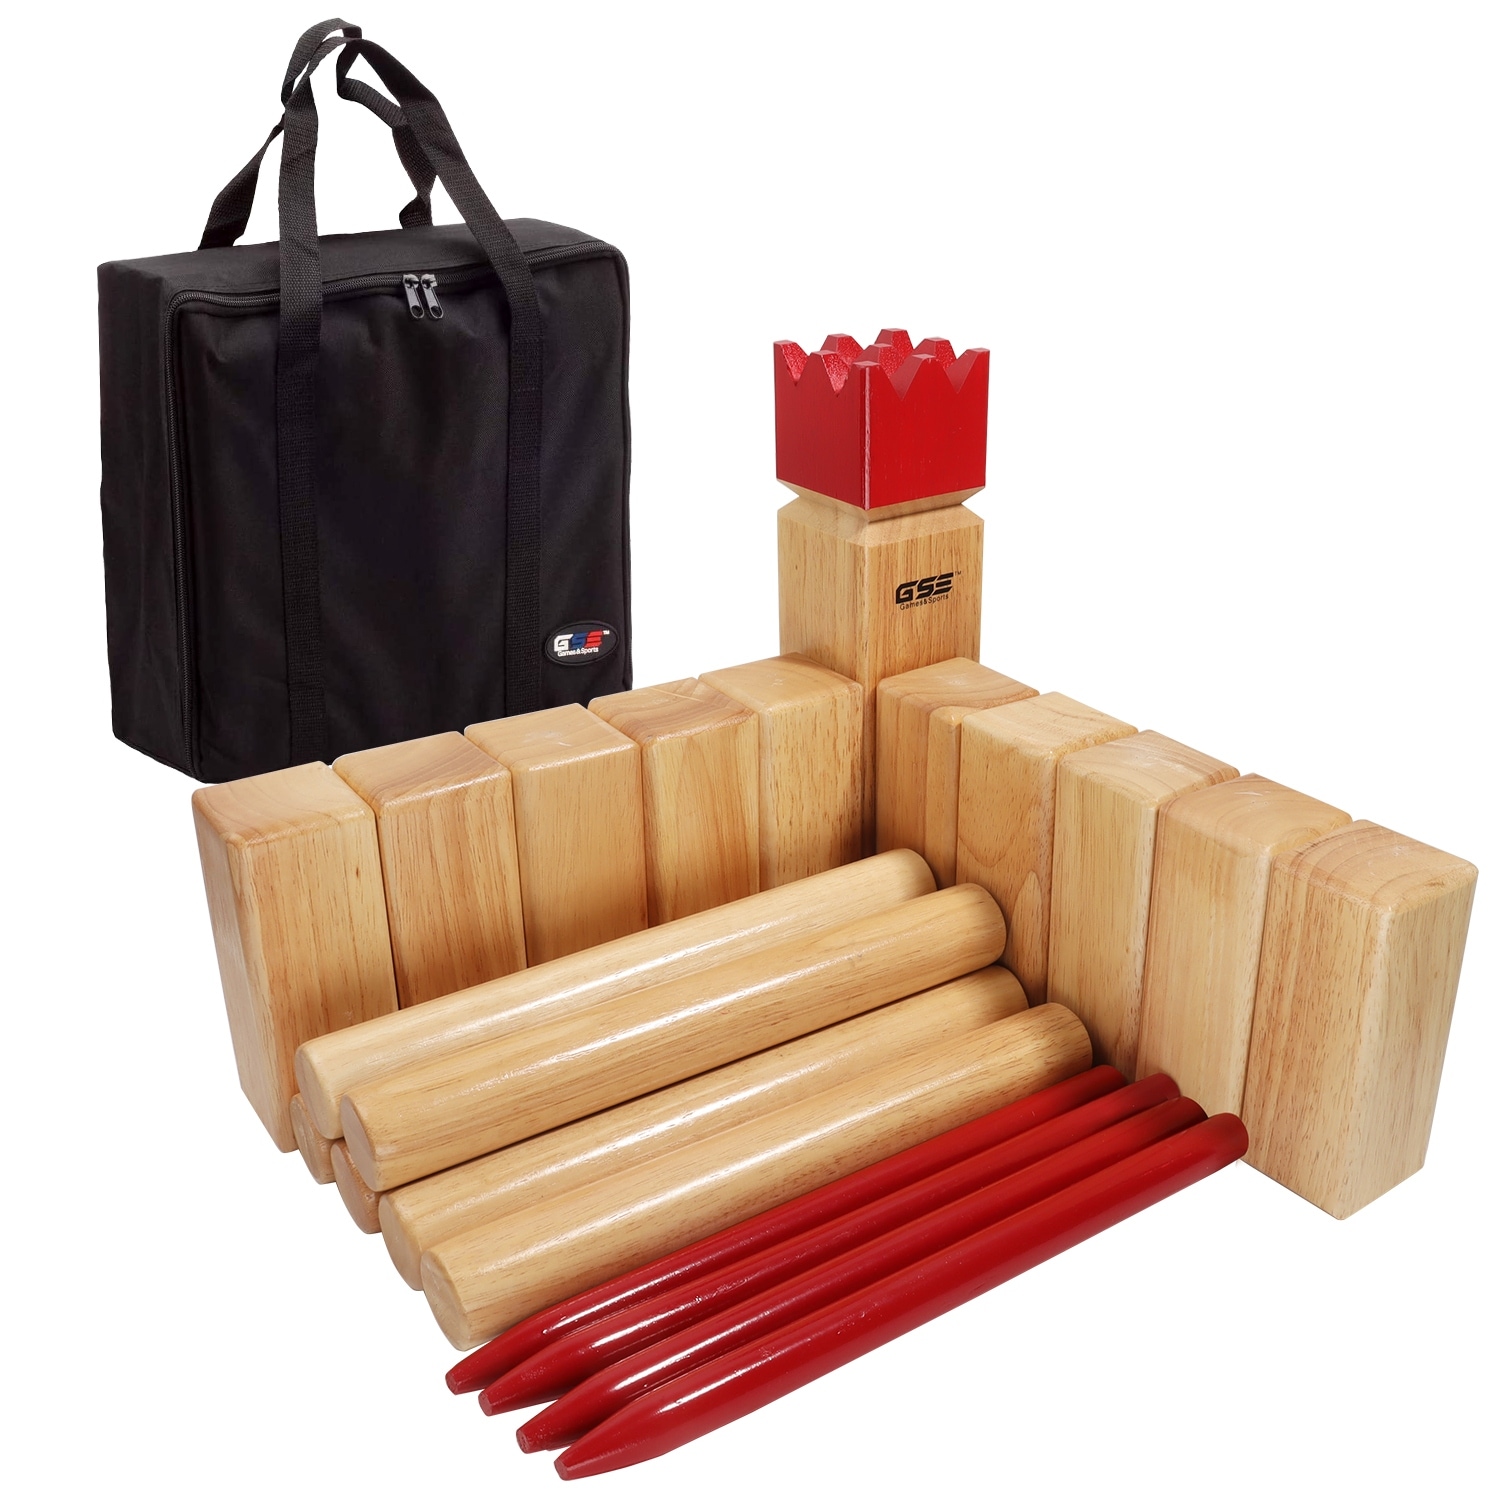  GETMOVIN SPORTS Kubb Premium Rubberwood Set, Viking Chess Fun  Outdoor Yard Game, Giant Board Game for The Beach, Lawn, or Party : Sports  & Outdoors